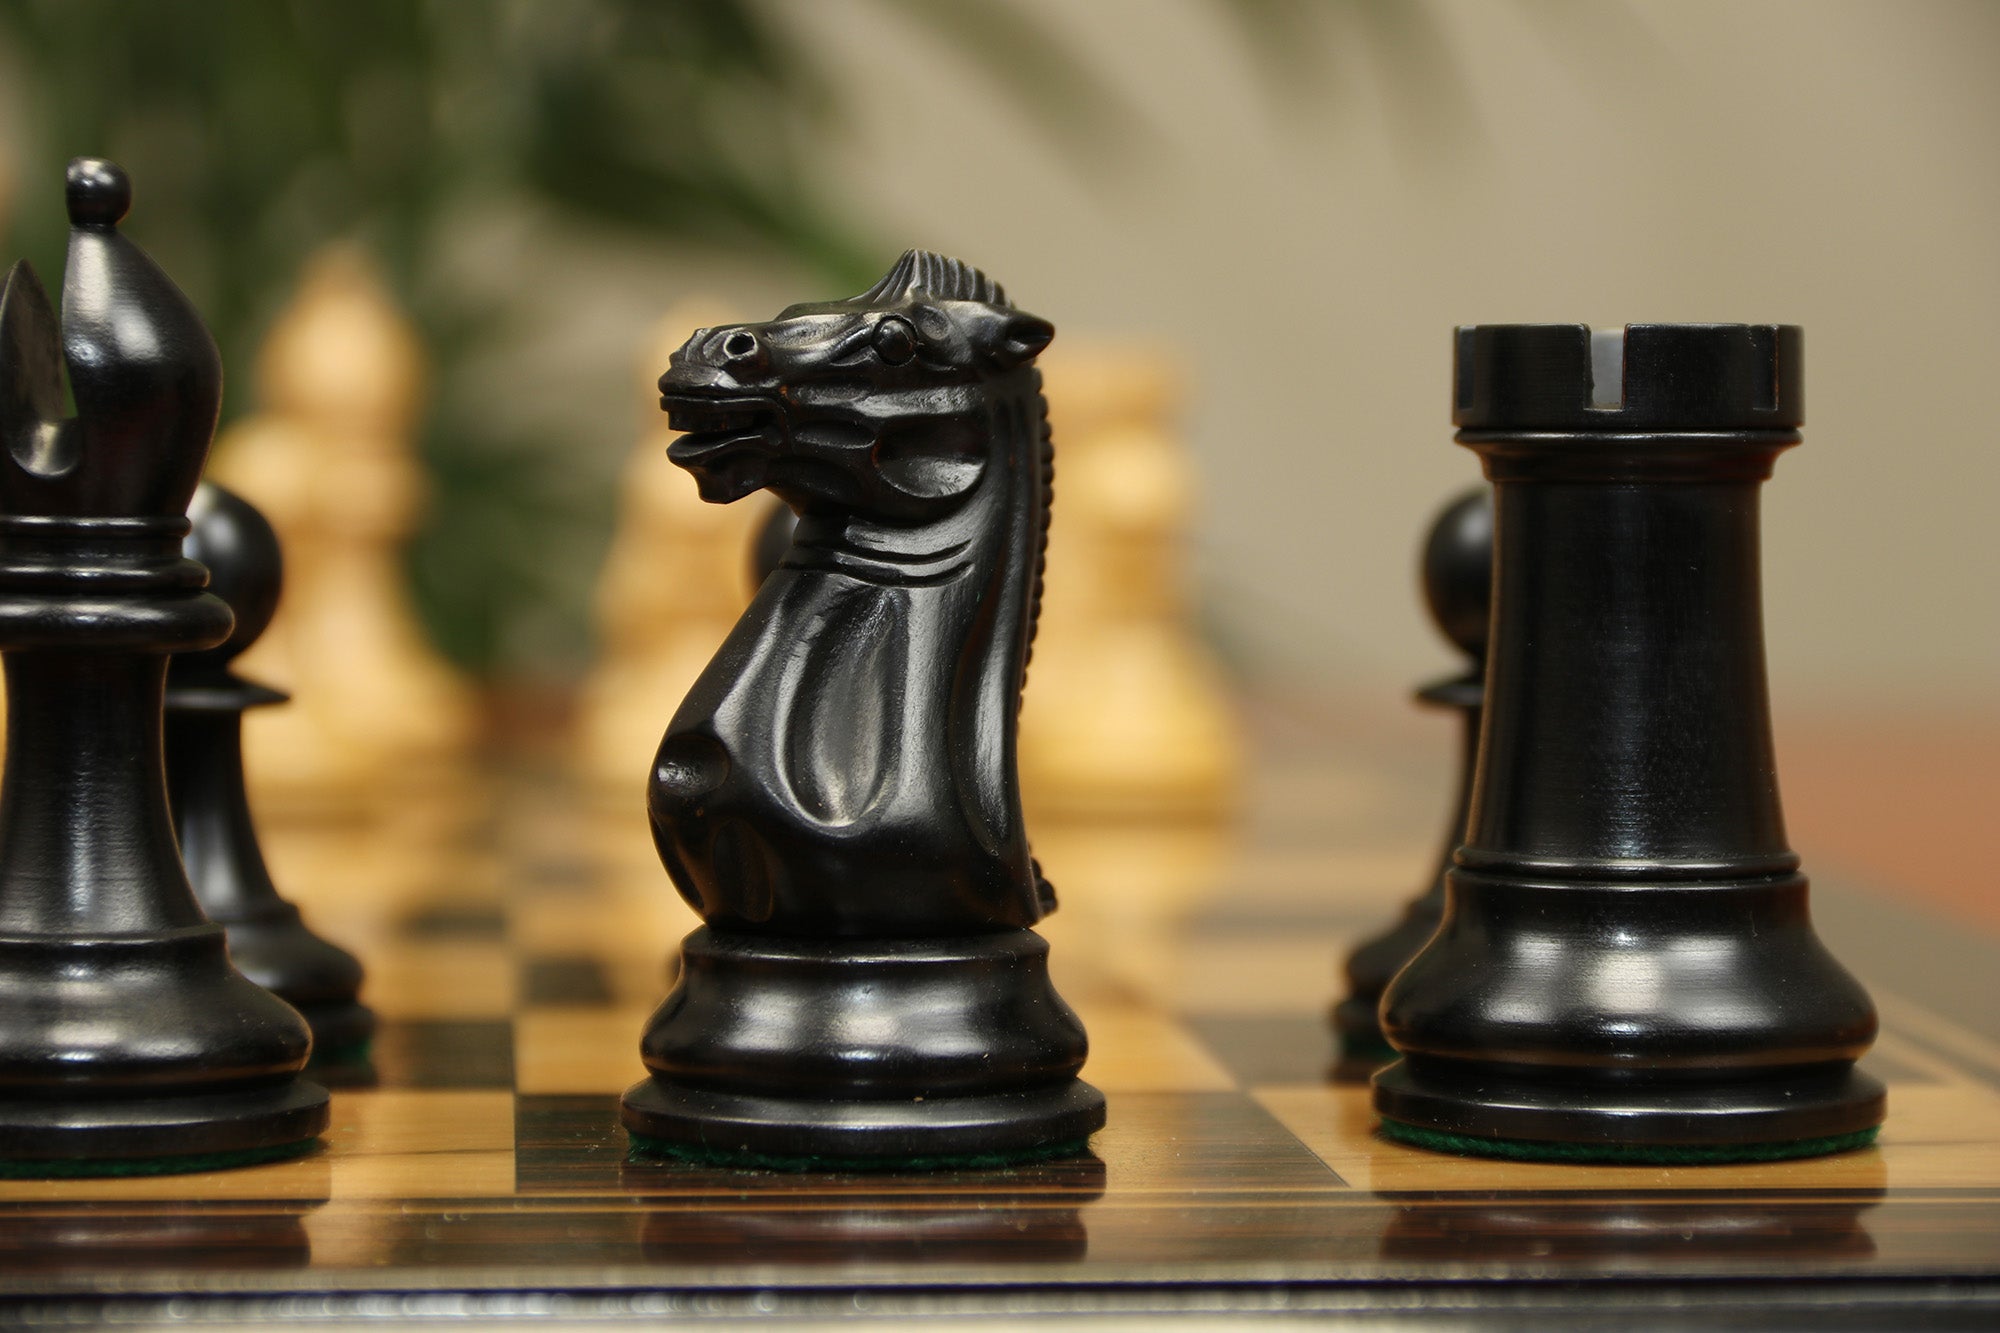 Anderson 1855-60 Reproduced 4.4" Staunton Chessmen in Non-Antiqued Boxwood & Ebonised